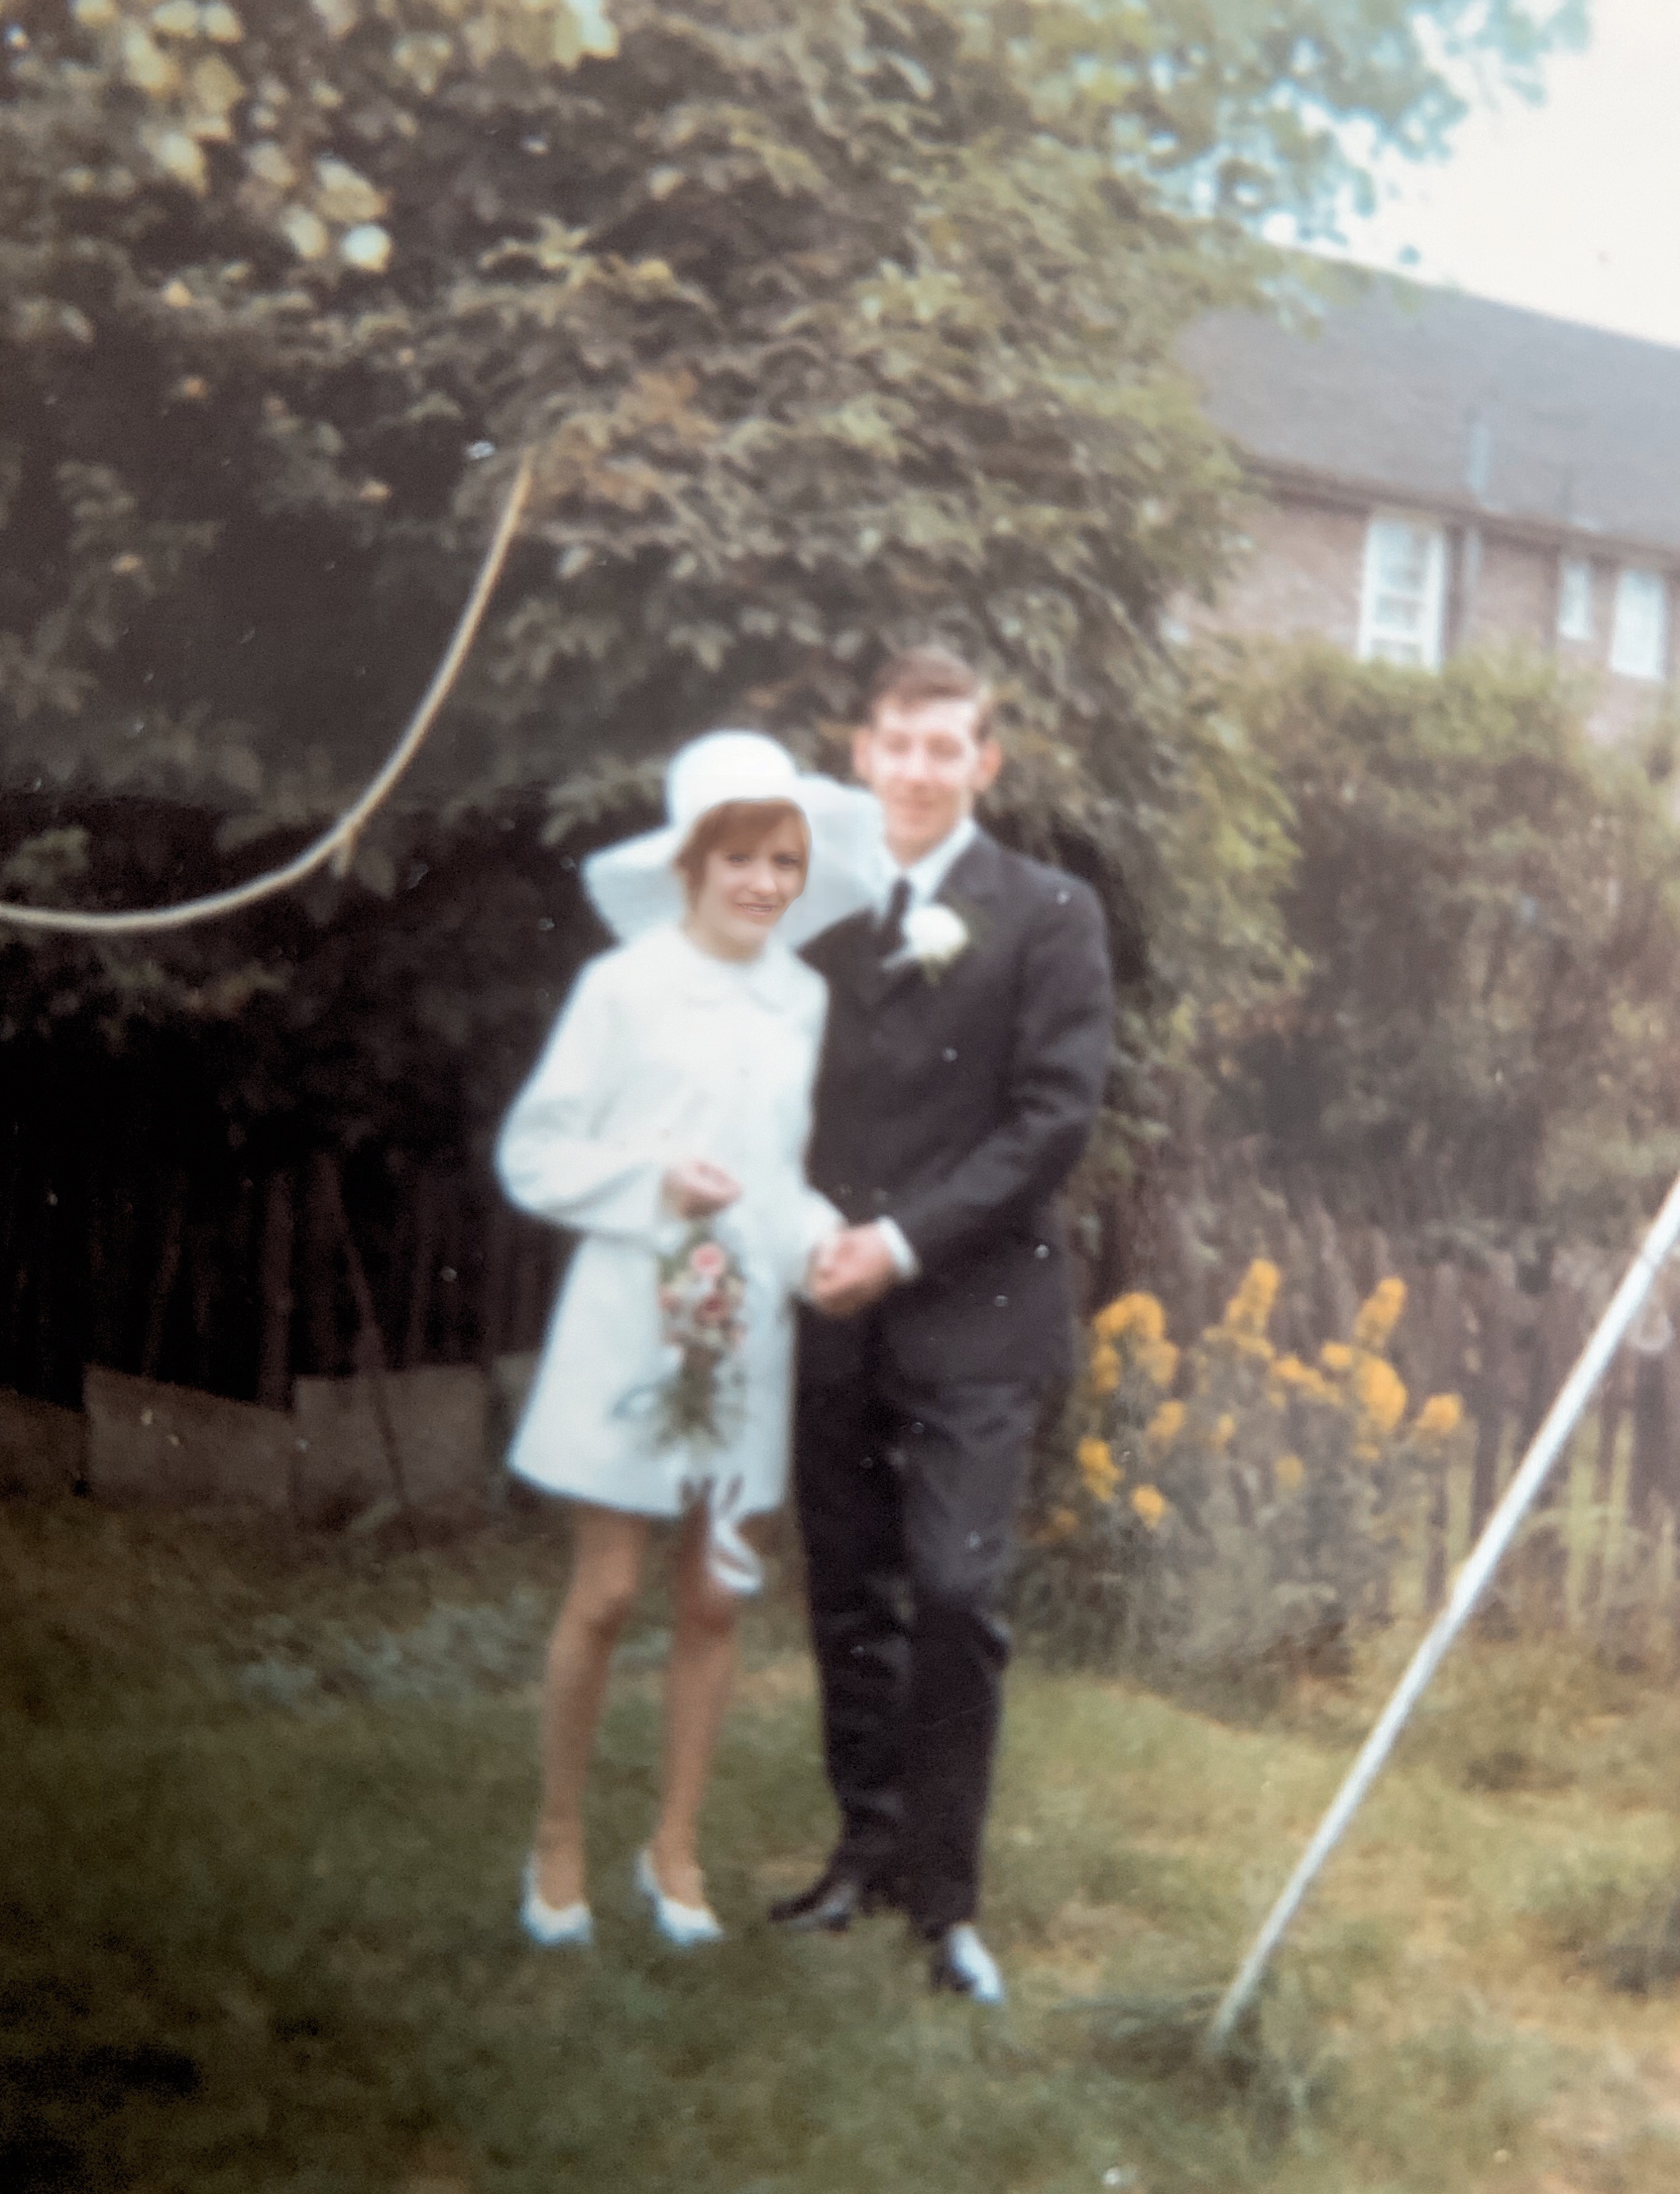 Our wedding day 23rd July 1971